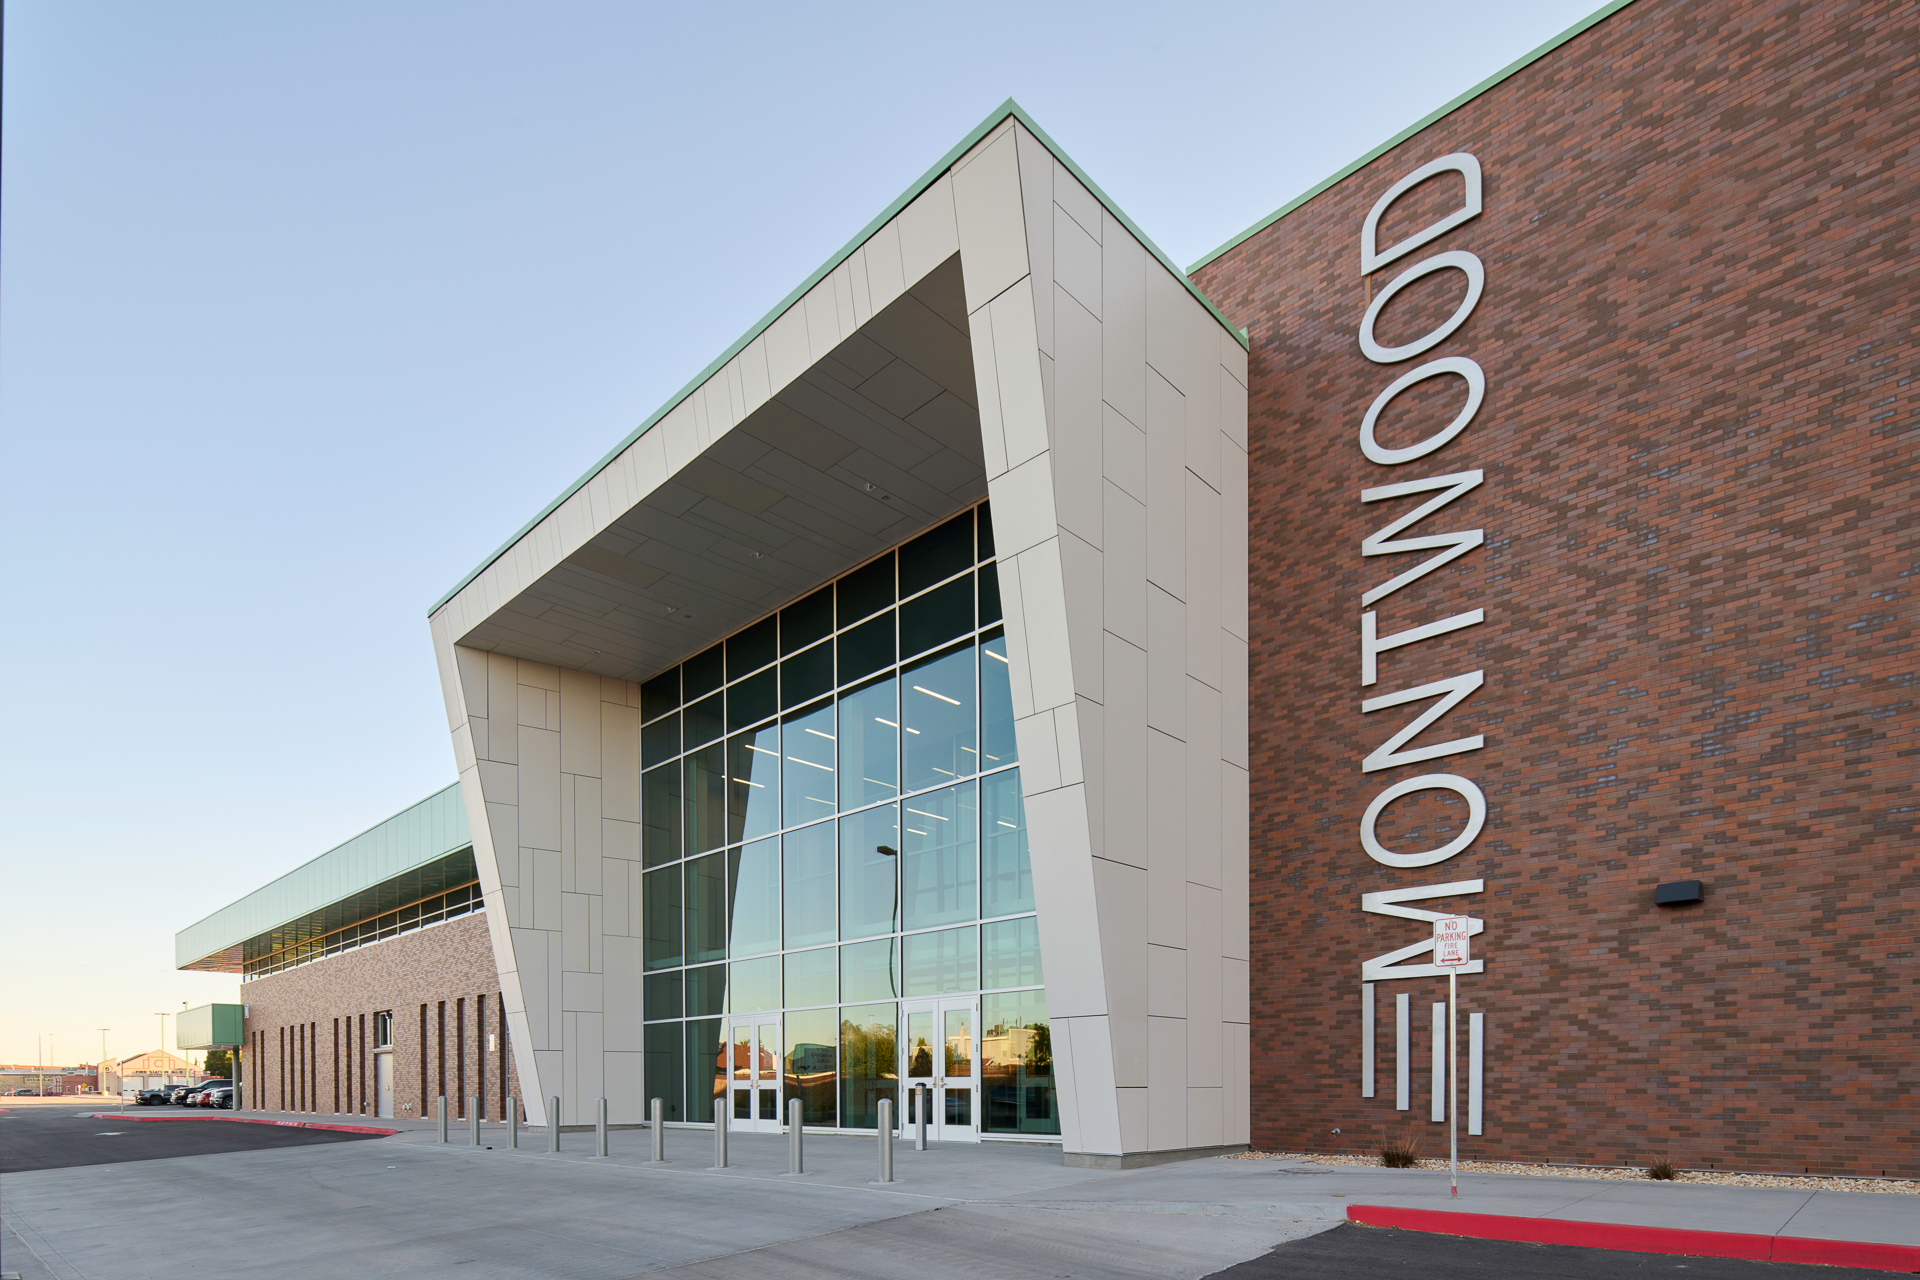 Architectural Photography of Montwood High School in El Paso, Texas